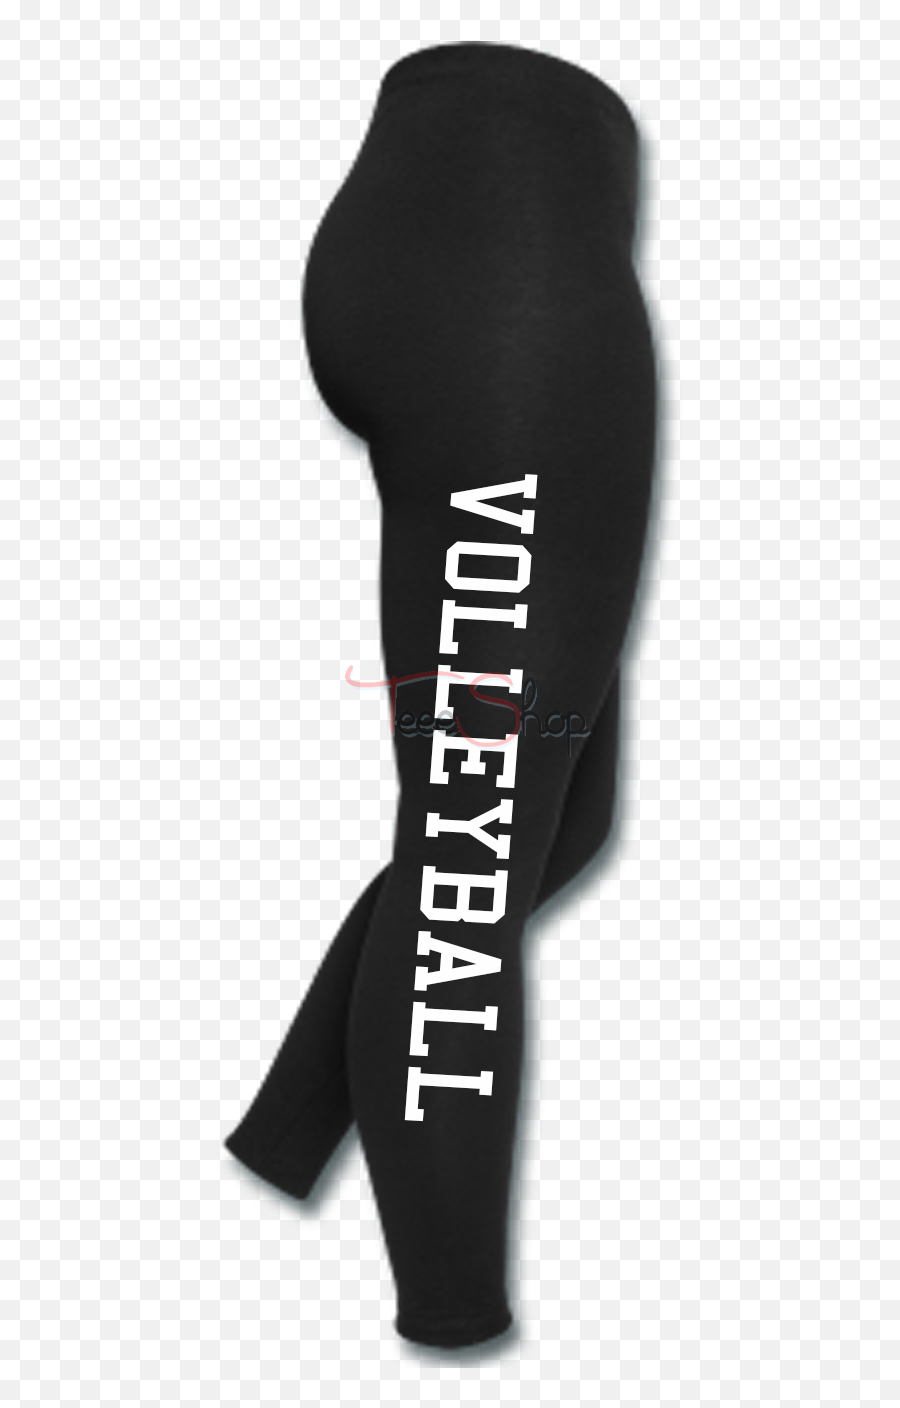 Volleyball Leggings - Volleyball Leggings Emoji,Is There A Volleyball Emoji